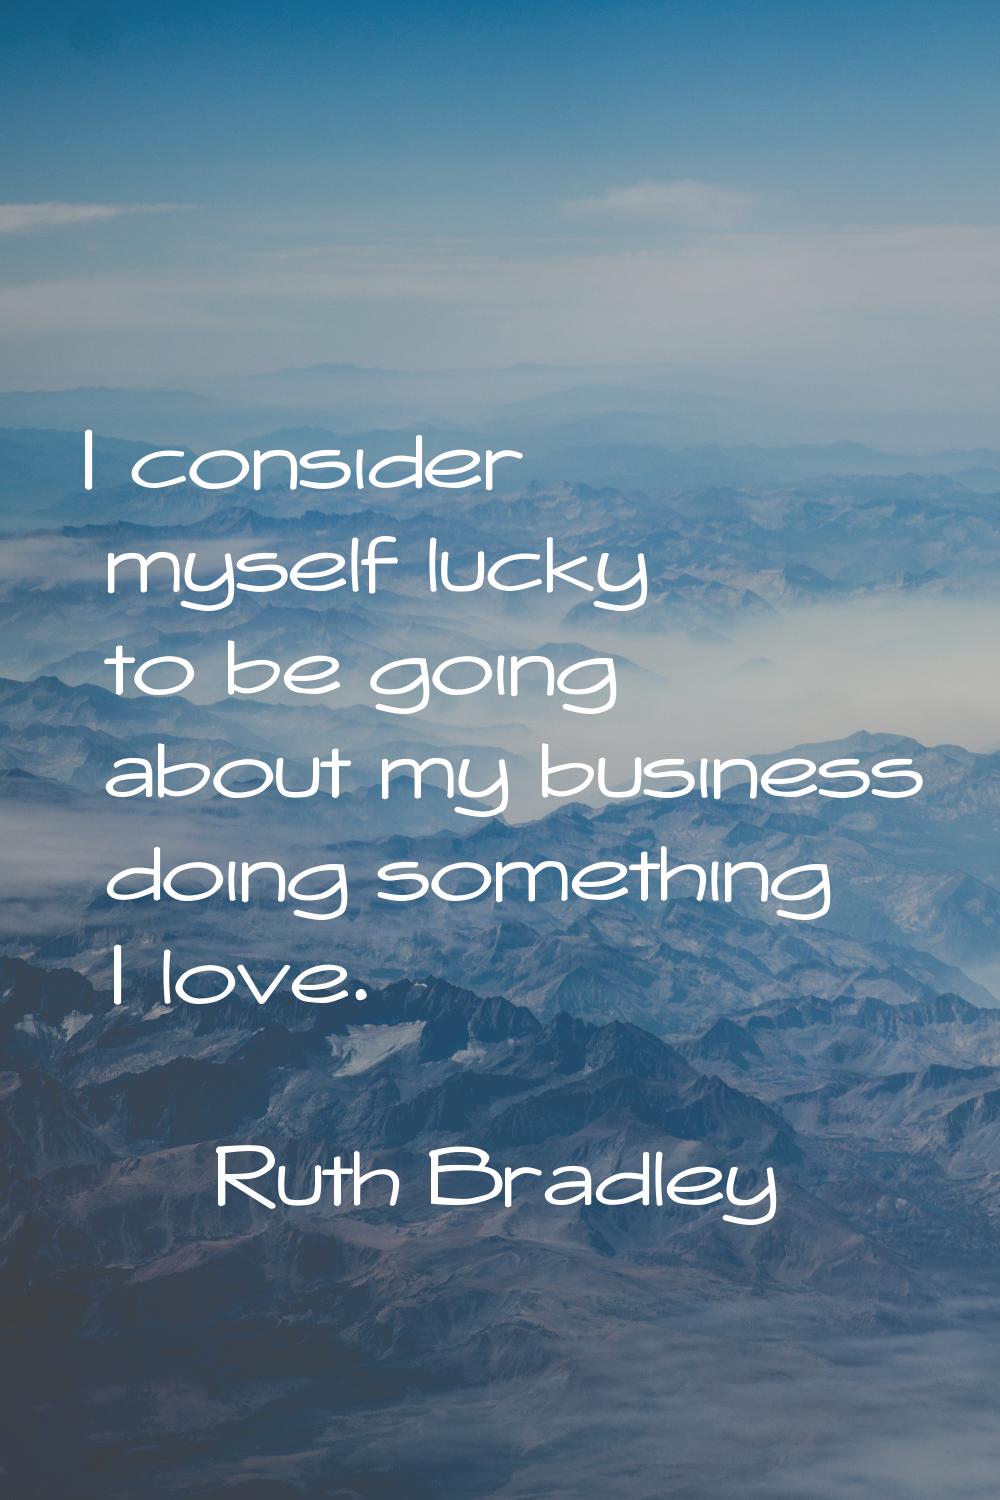 I consider myself lucky to be going about my business doing something I love.